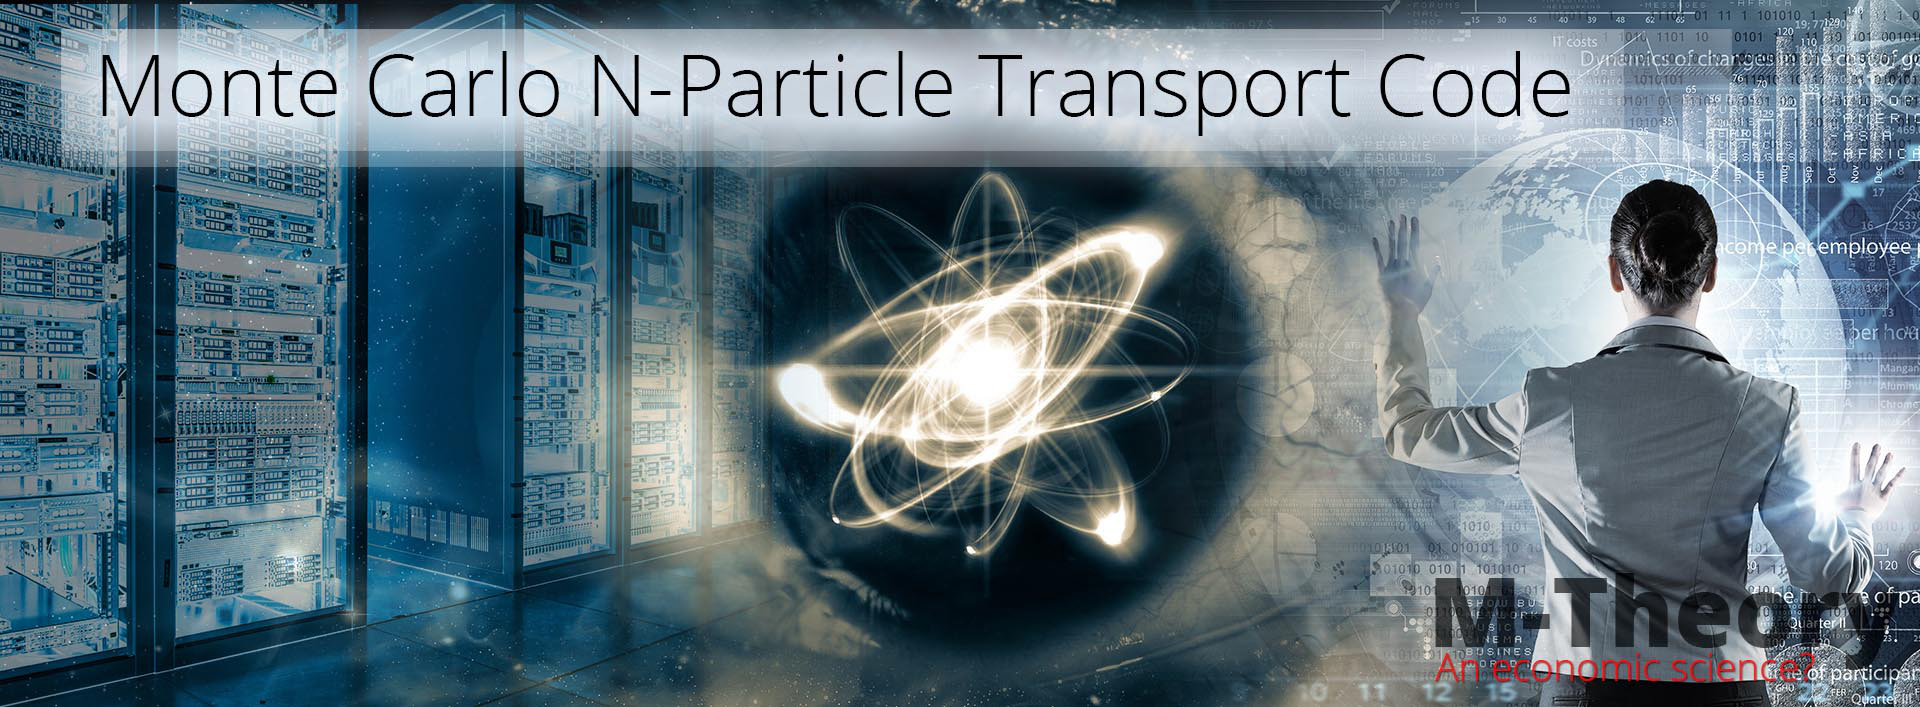 monte carlo N-particle transport code